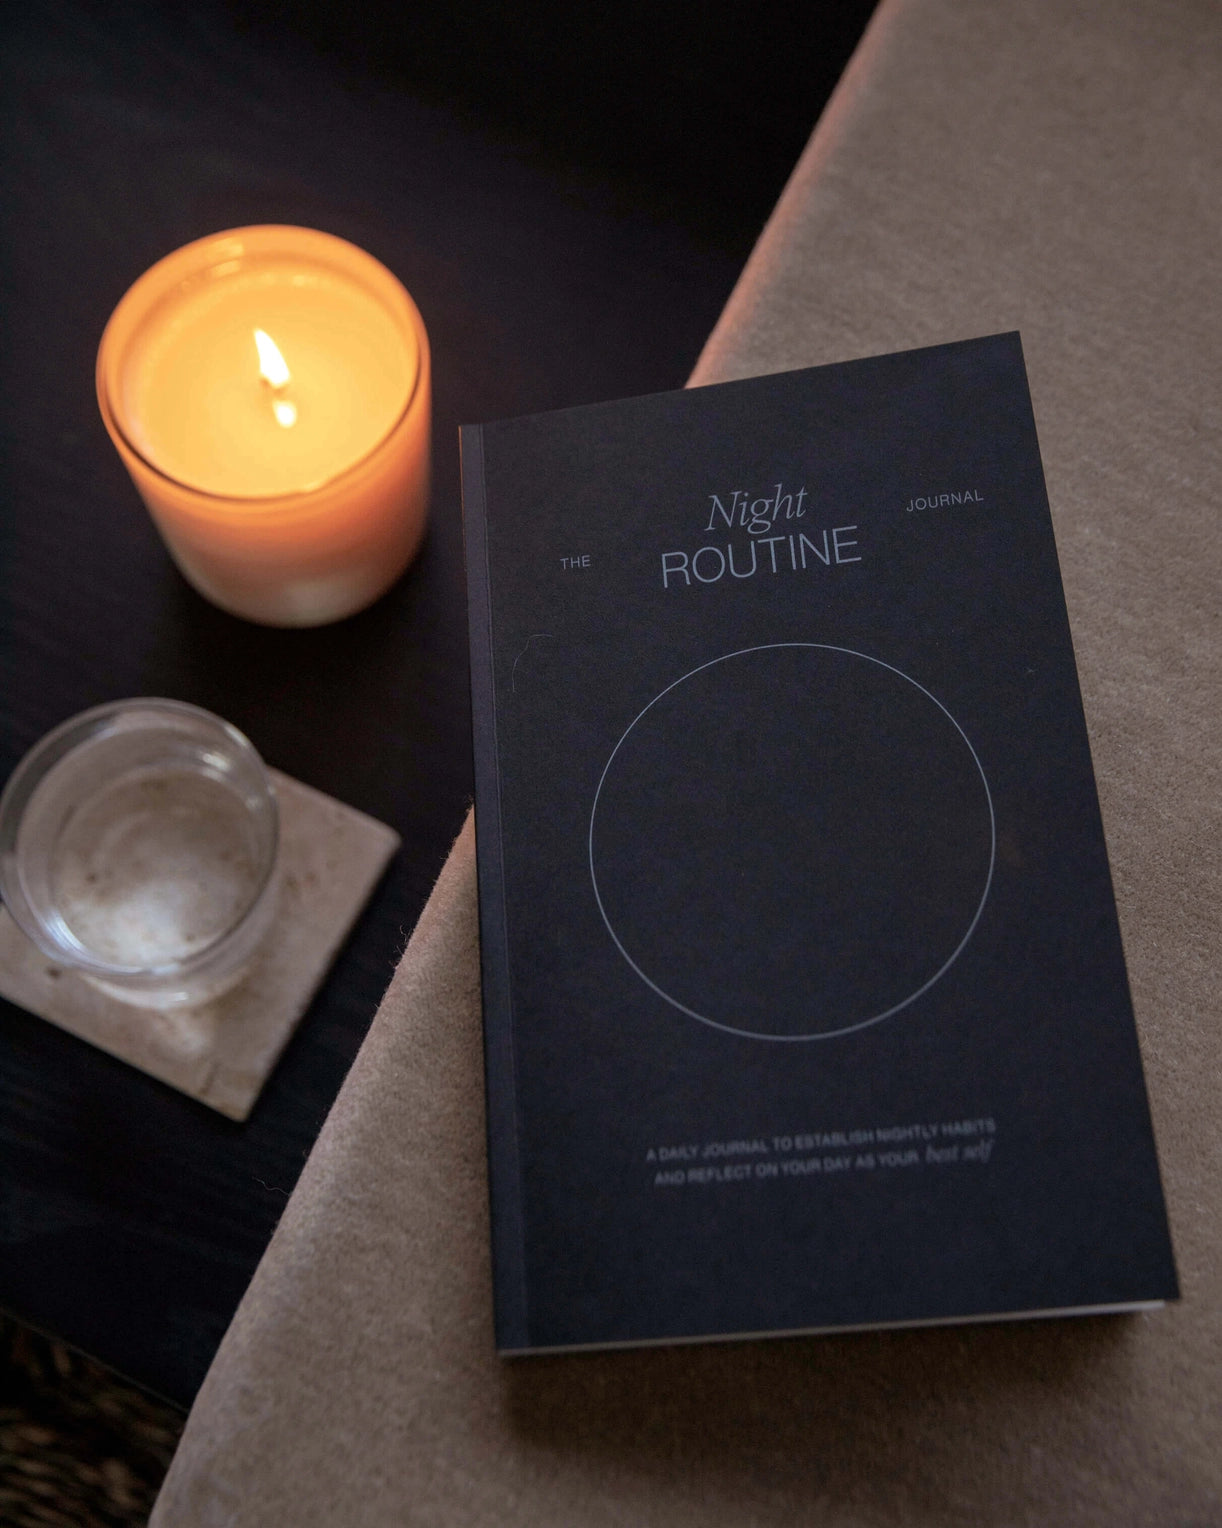 Night Routine Journal - A beautifully designed journal to help you unwind and reflect at the end of your day. With thoughtful prompts and space for personal notes, this journal is perfect for cultivating mindfulness and self-care. Available in various elegant designs, it's a wonderful companion for your nighttime rituals. Start your journey to a more peaceful evening routine with this exquisite journal. This journal is from Wilde House Papers and sold at Blackbird Designs.